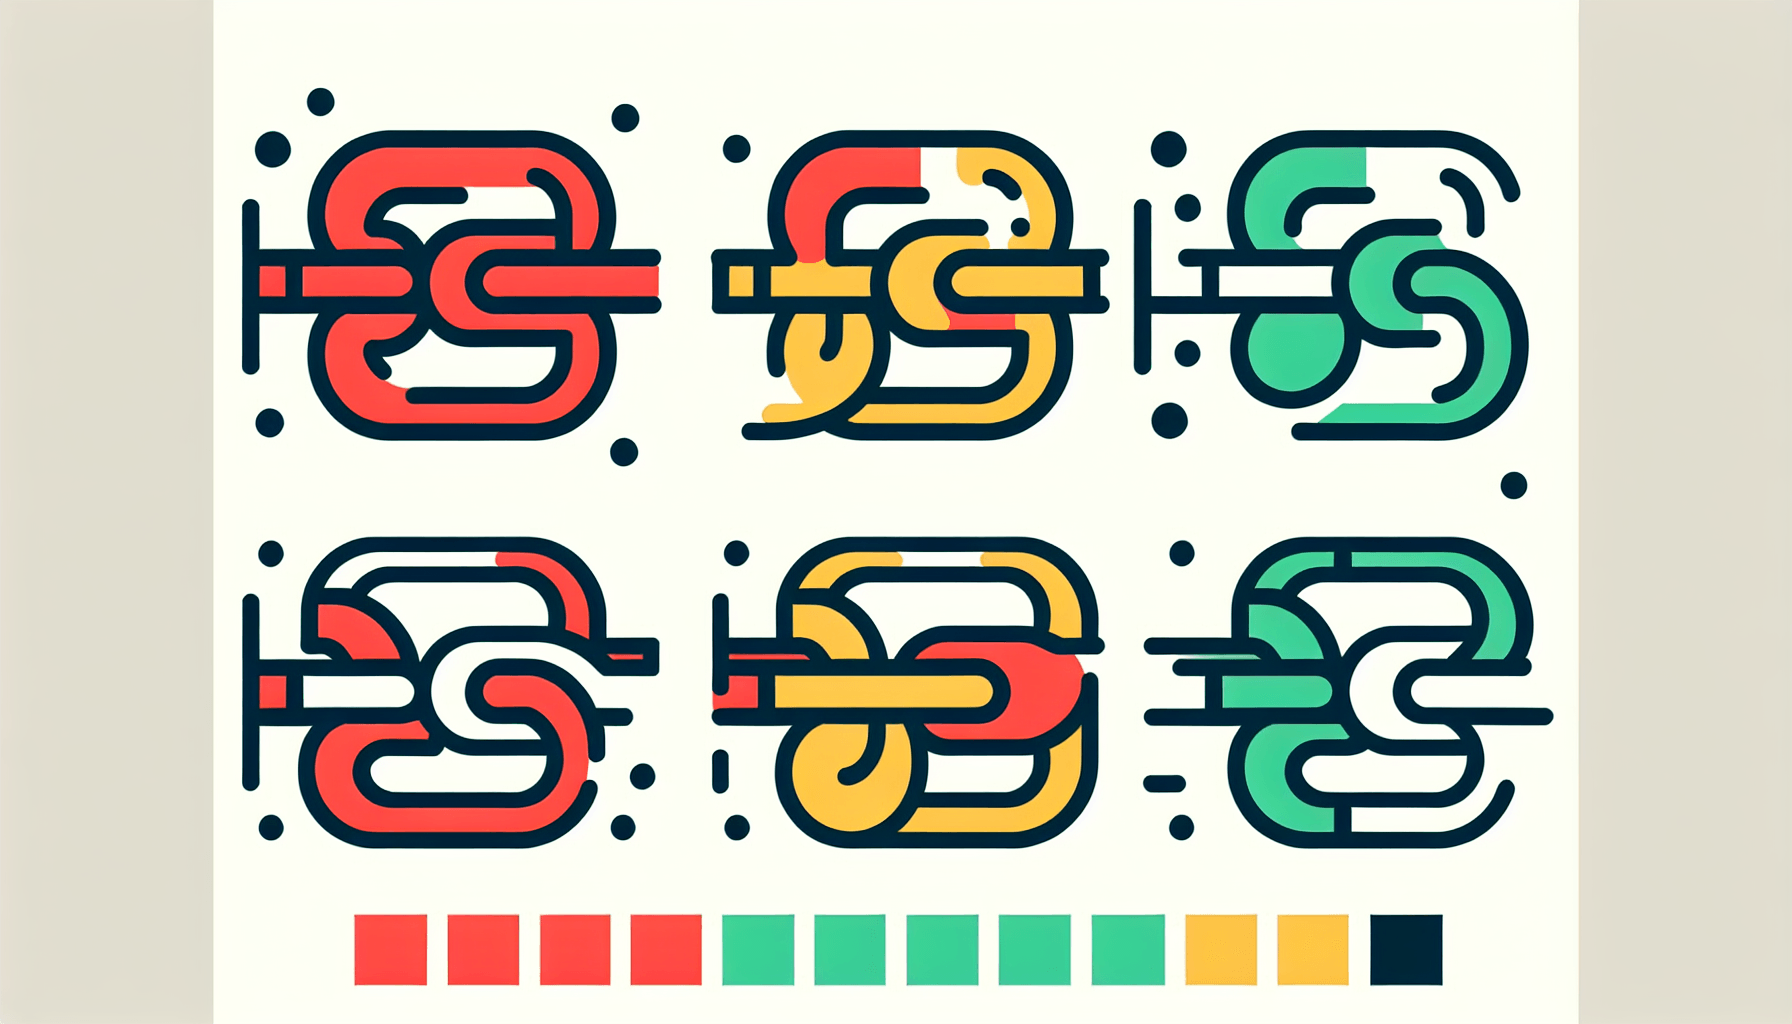 Chain links in flat illustration style and white background, red #f47574, green #88c7a8, yellow #fcc44b, and blue #645bc8 colors.